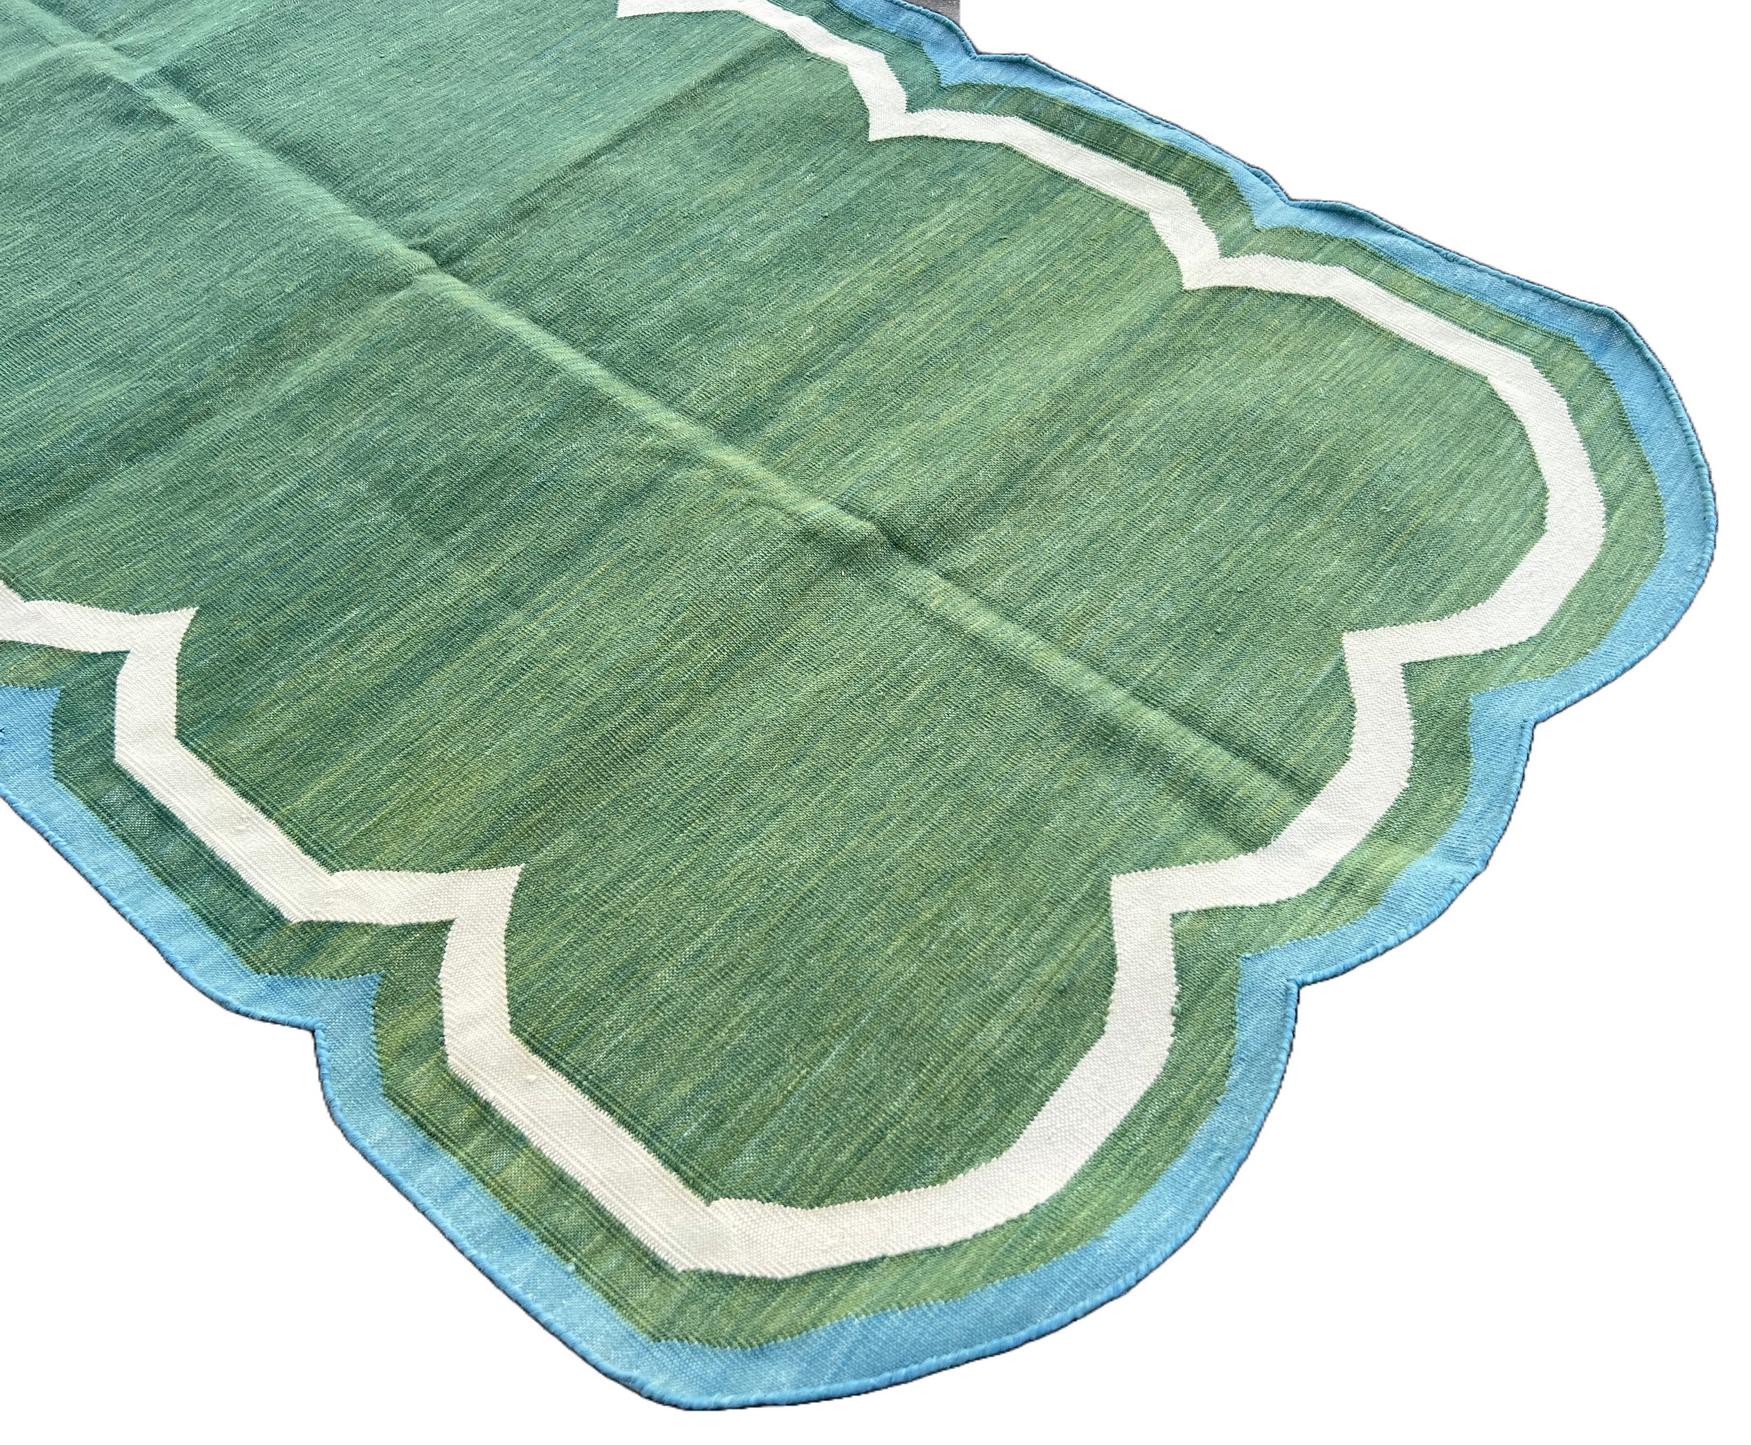 Indian Handmade Cotton Area Flat Weave Rug, 3x5 Green And Blue Scalloped Kilim Dhurrie For Sale